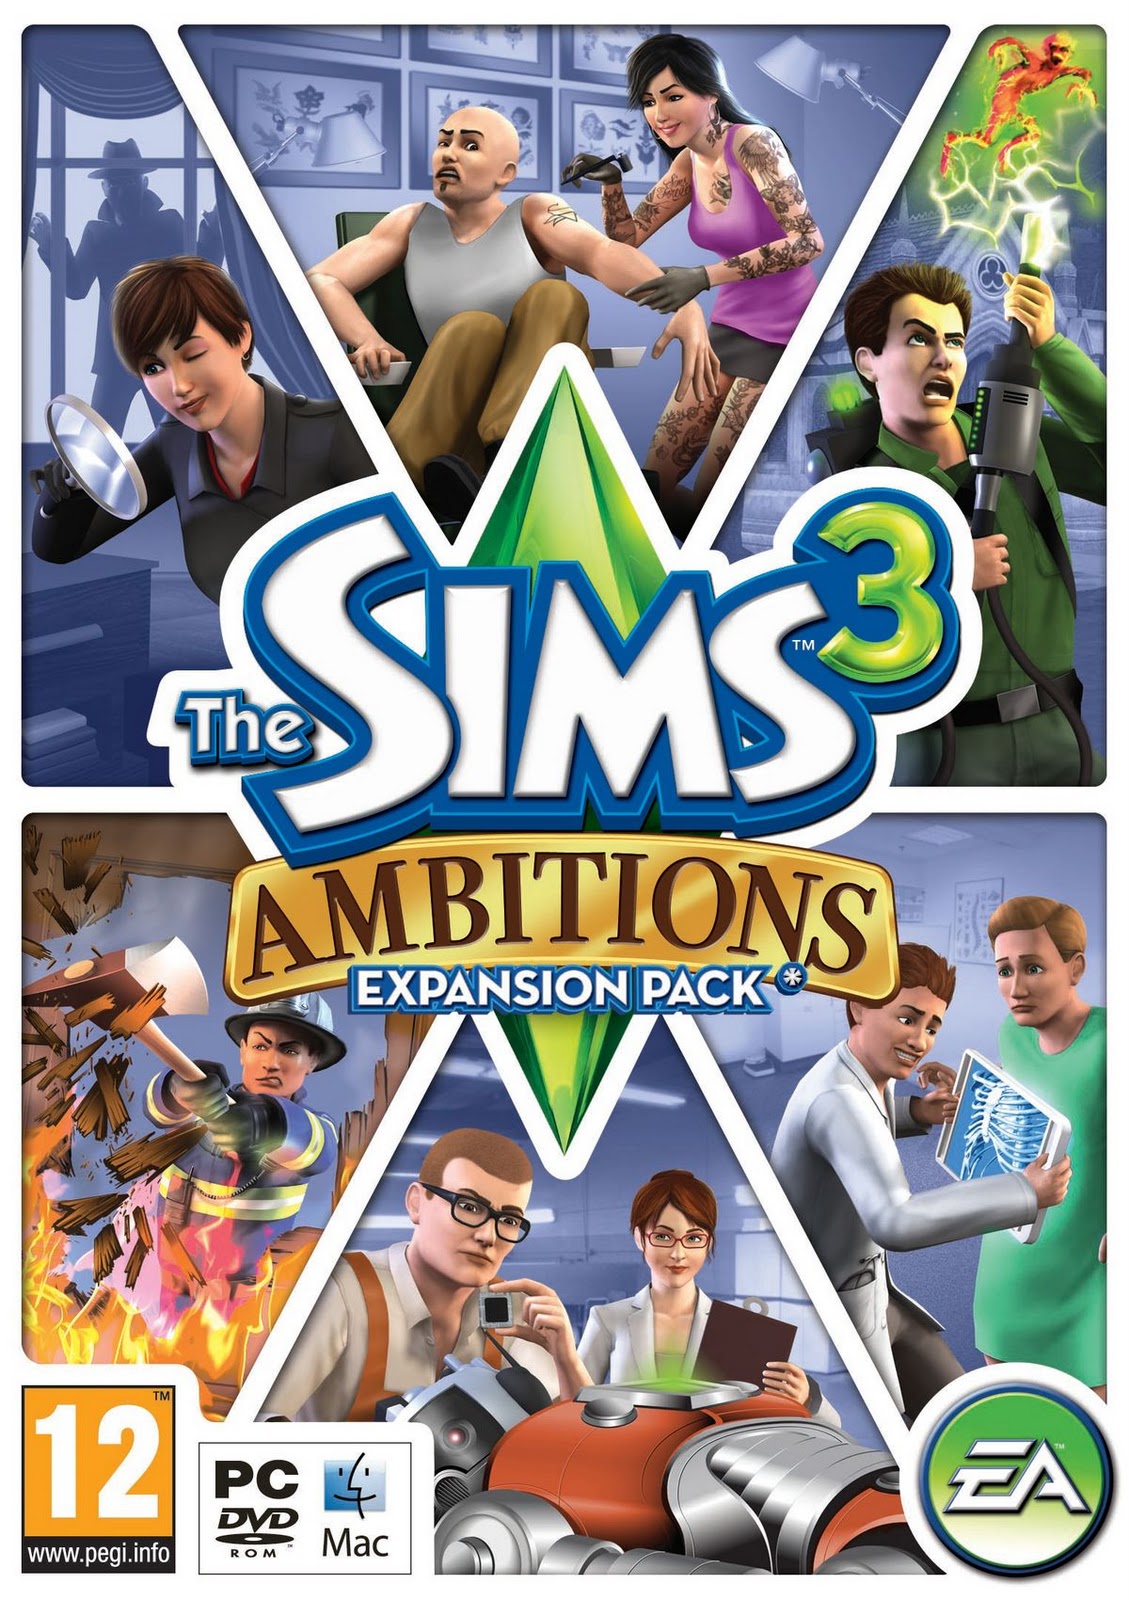 The Sims 3 Ambitions Pc - Free downloads and reviews